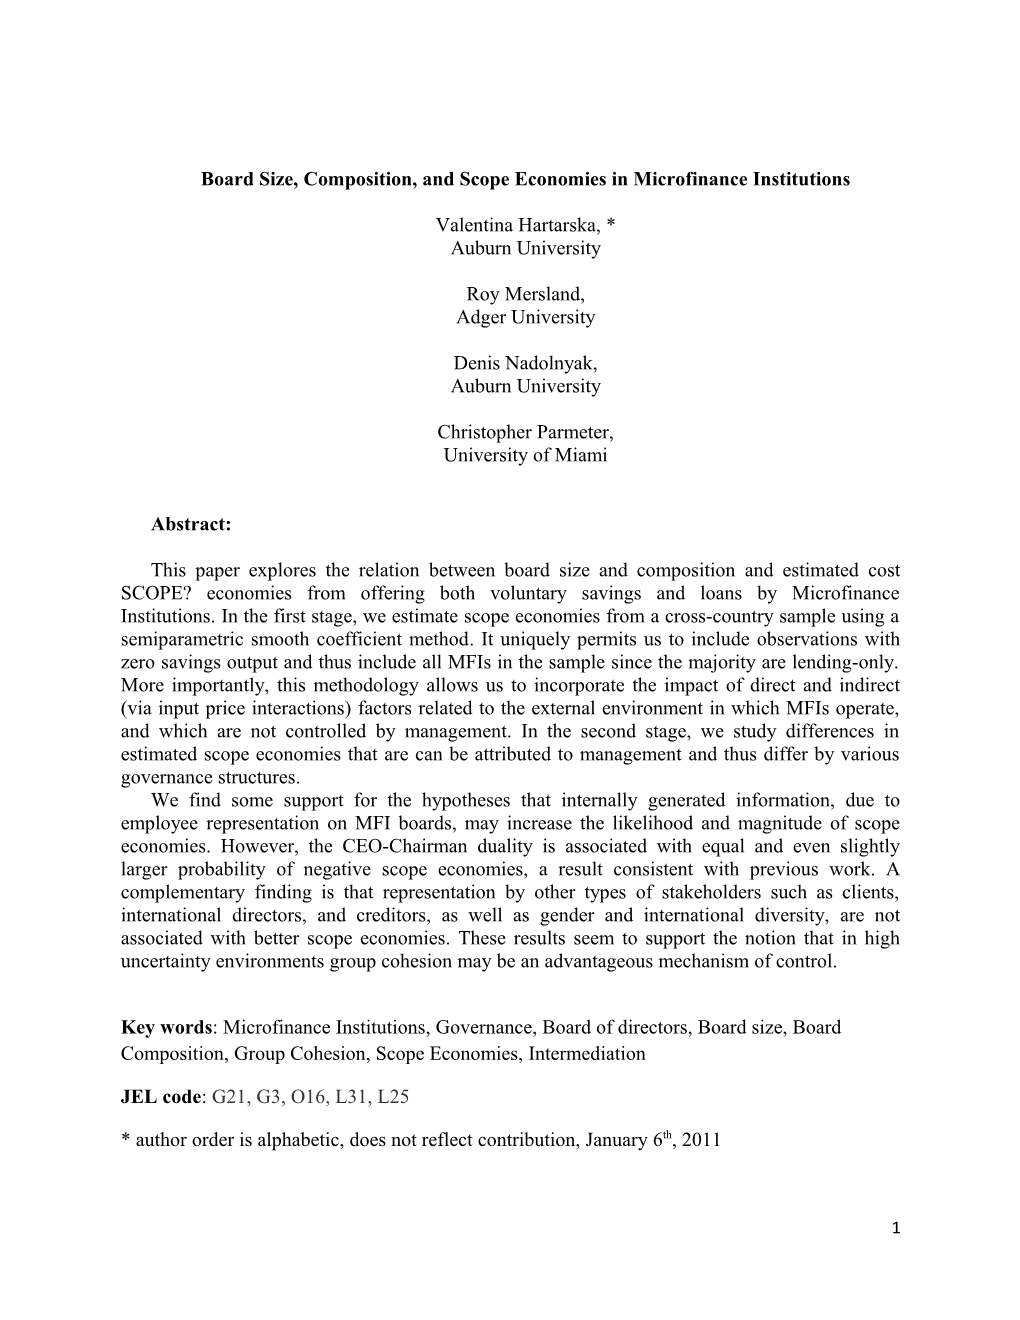 Board Size, Composition, and Scope Economies in Microfinance Institutions